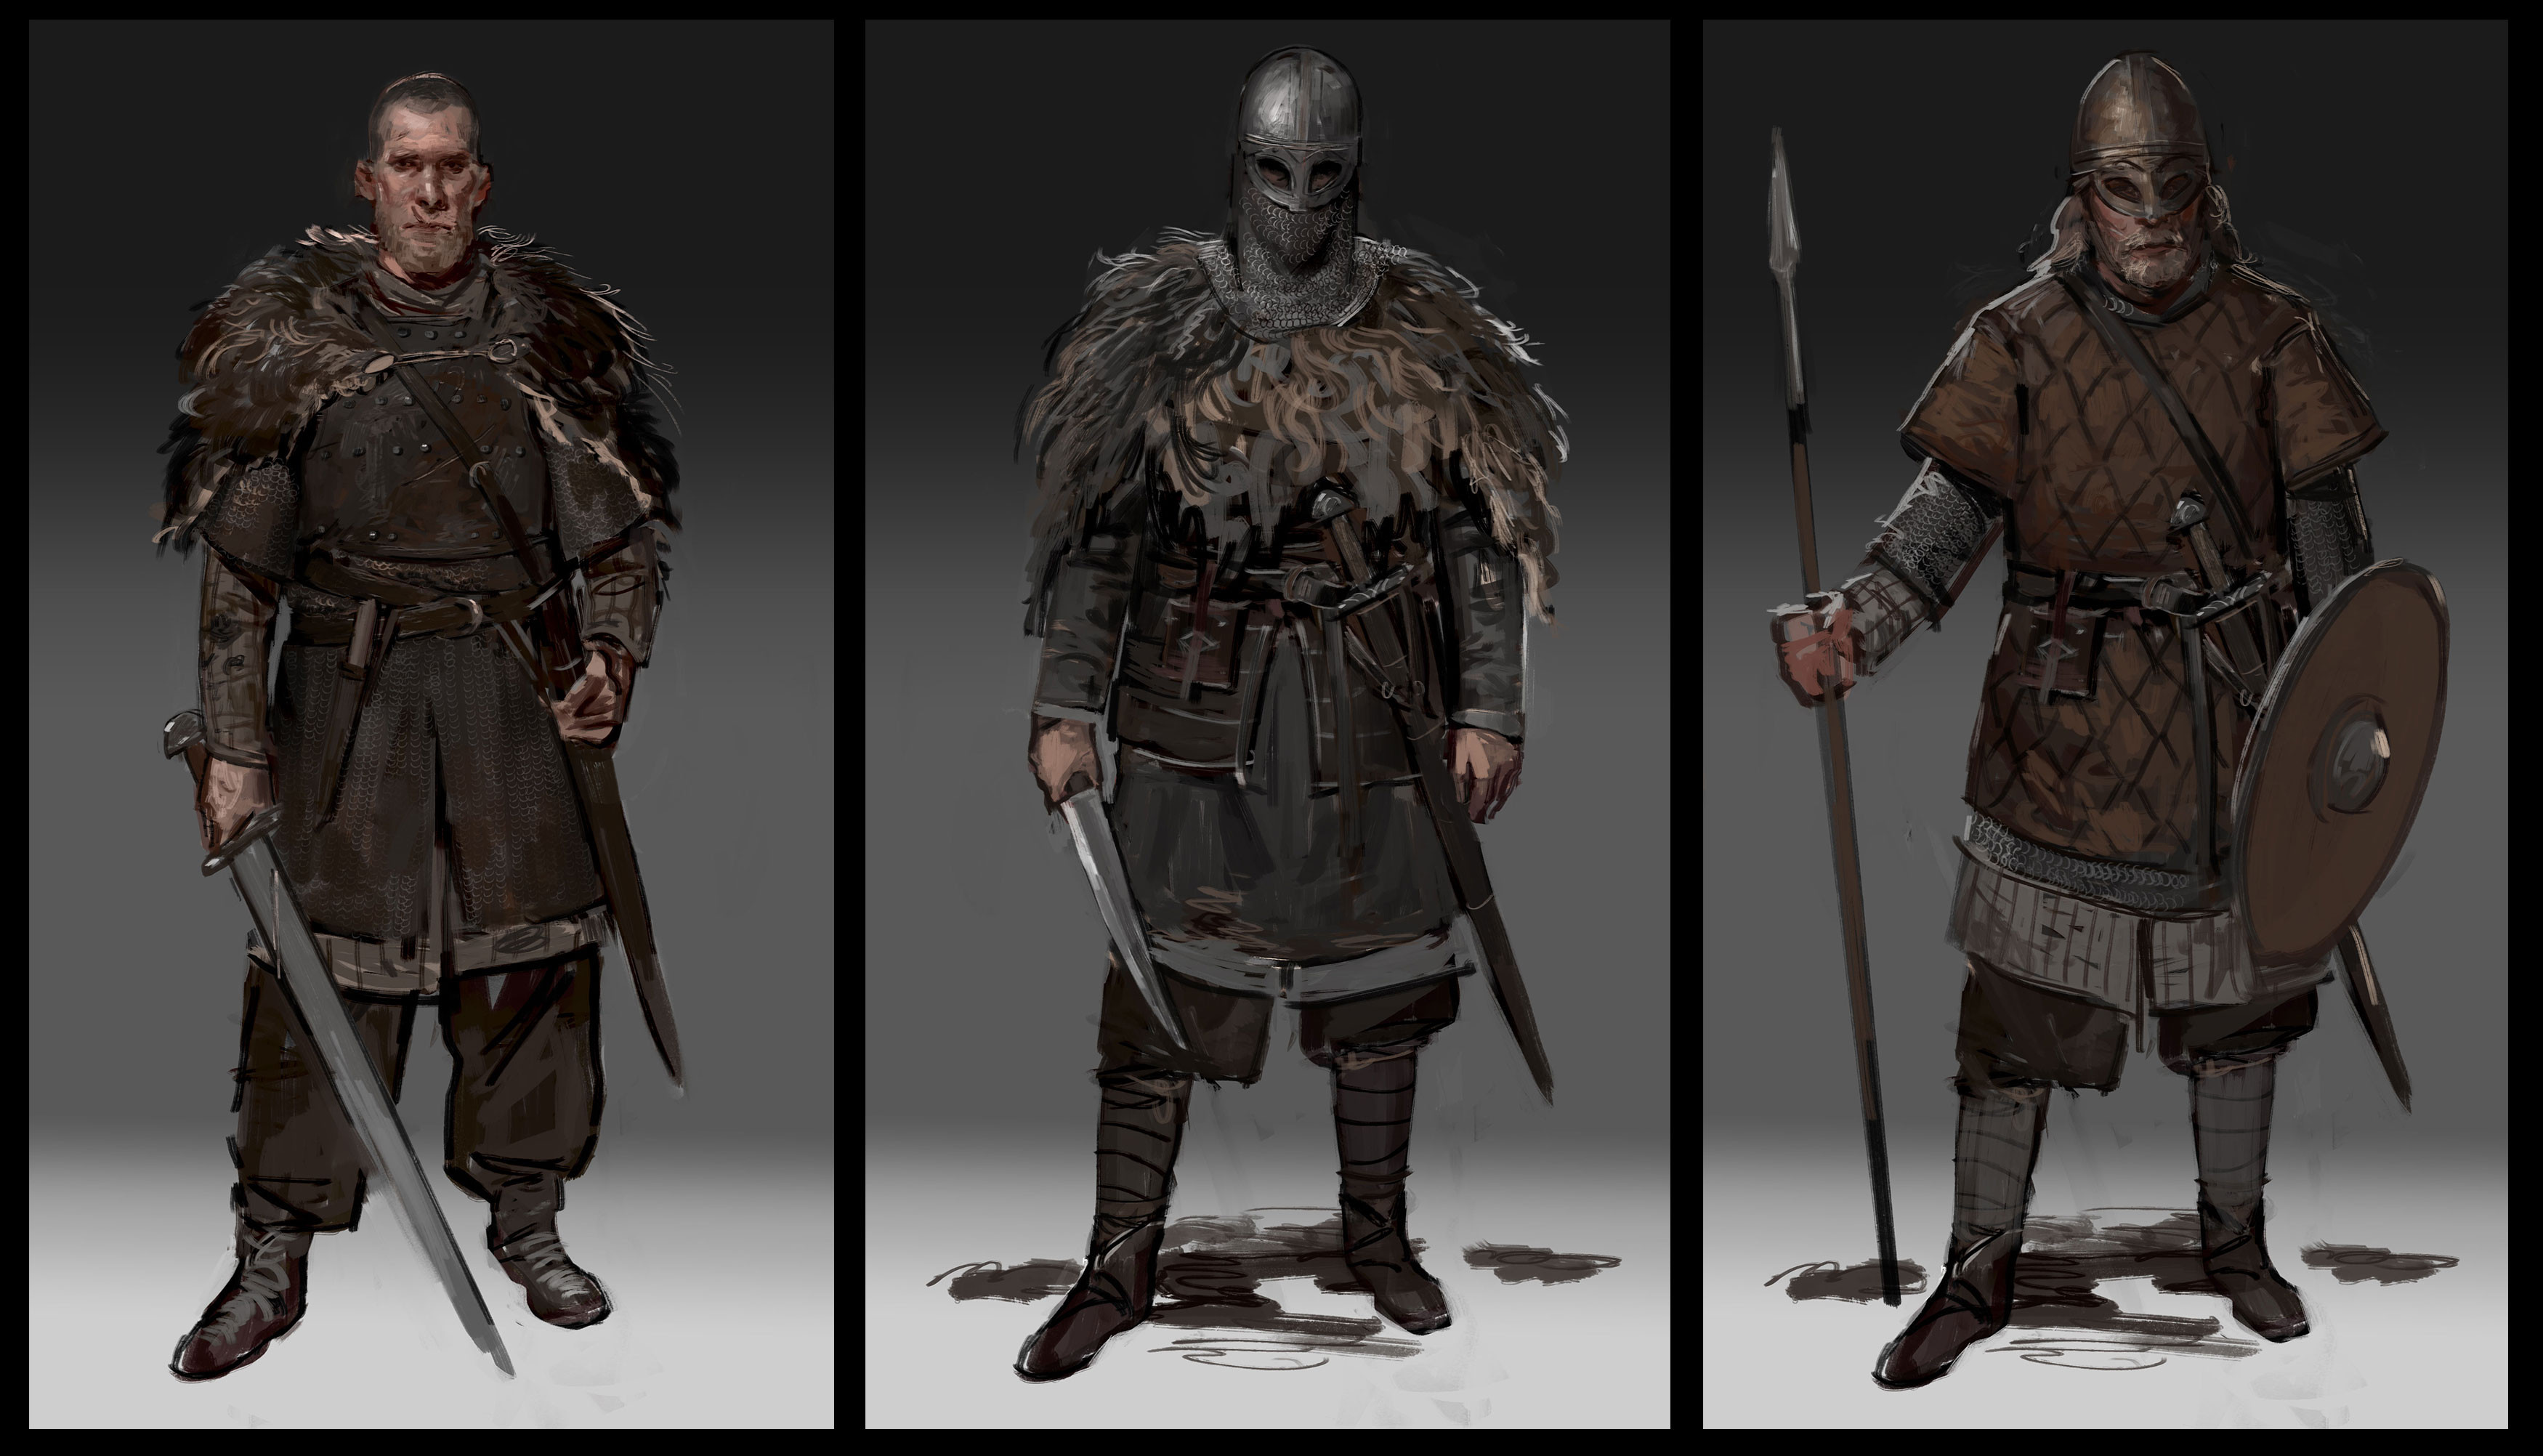 Outfits inspired by costumes featured in the movie The Northman (2022), especially the character in the middle.